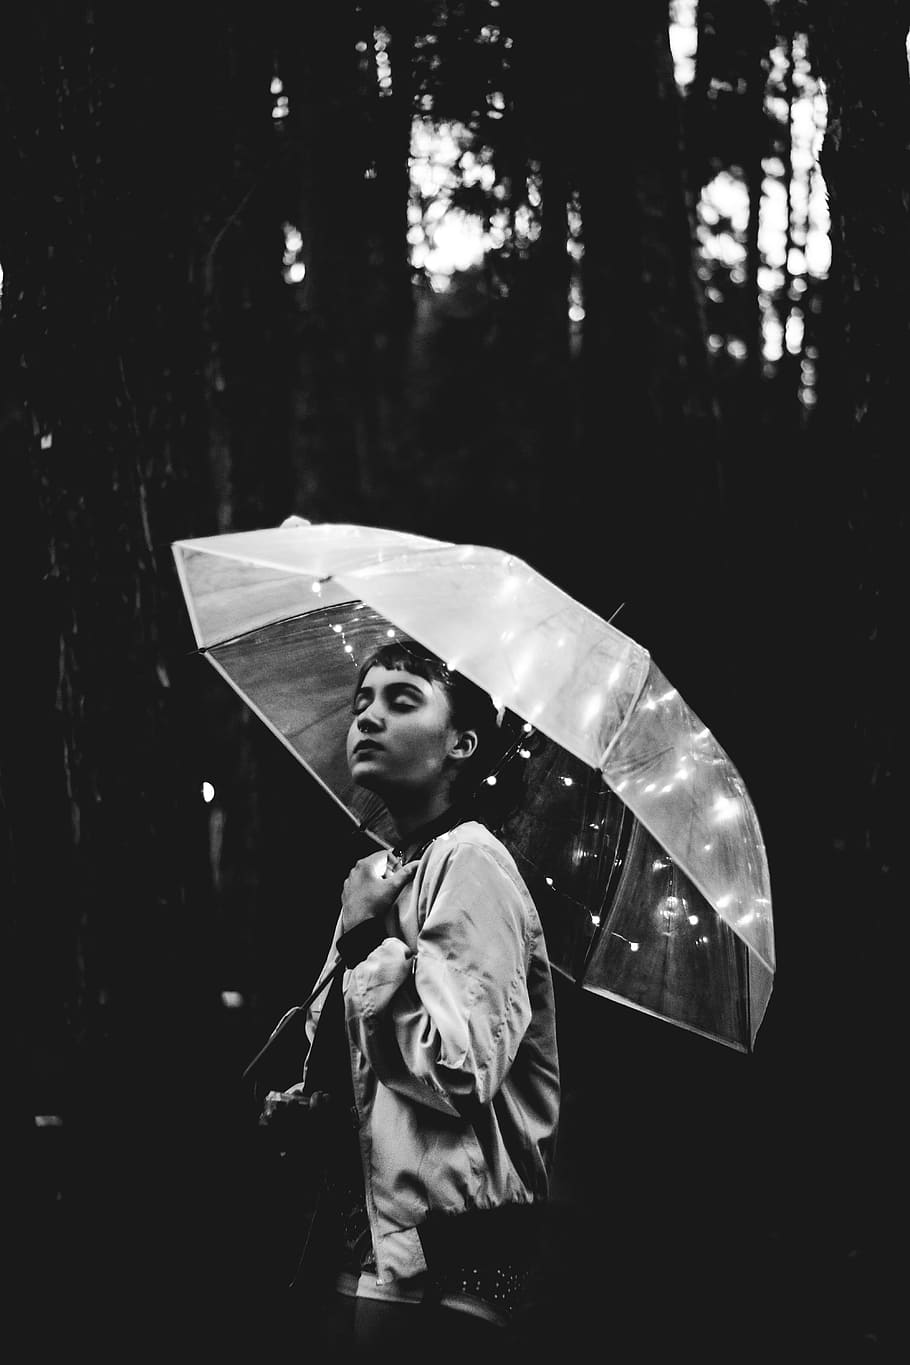 Grayscale Image of Woman Walking Through the Rain While Holding Umbrella, HD wallpaper